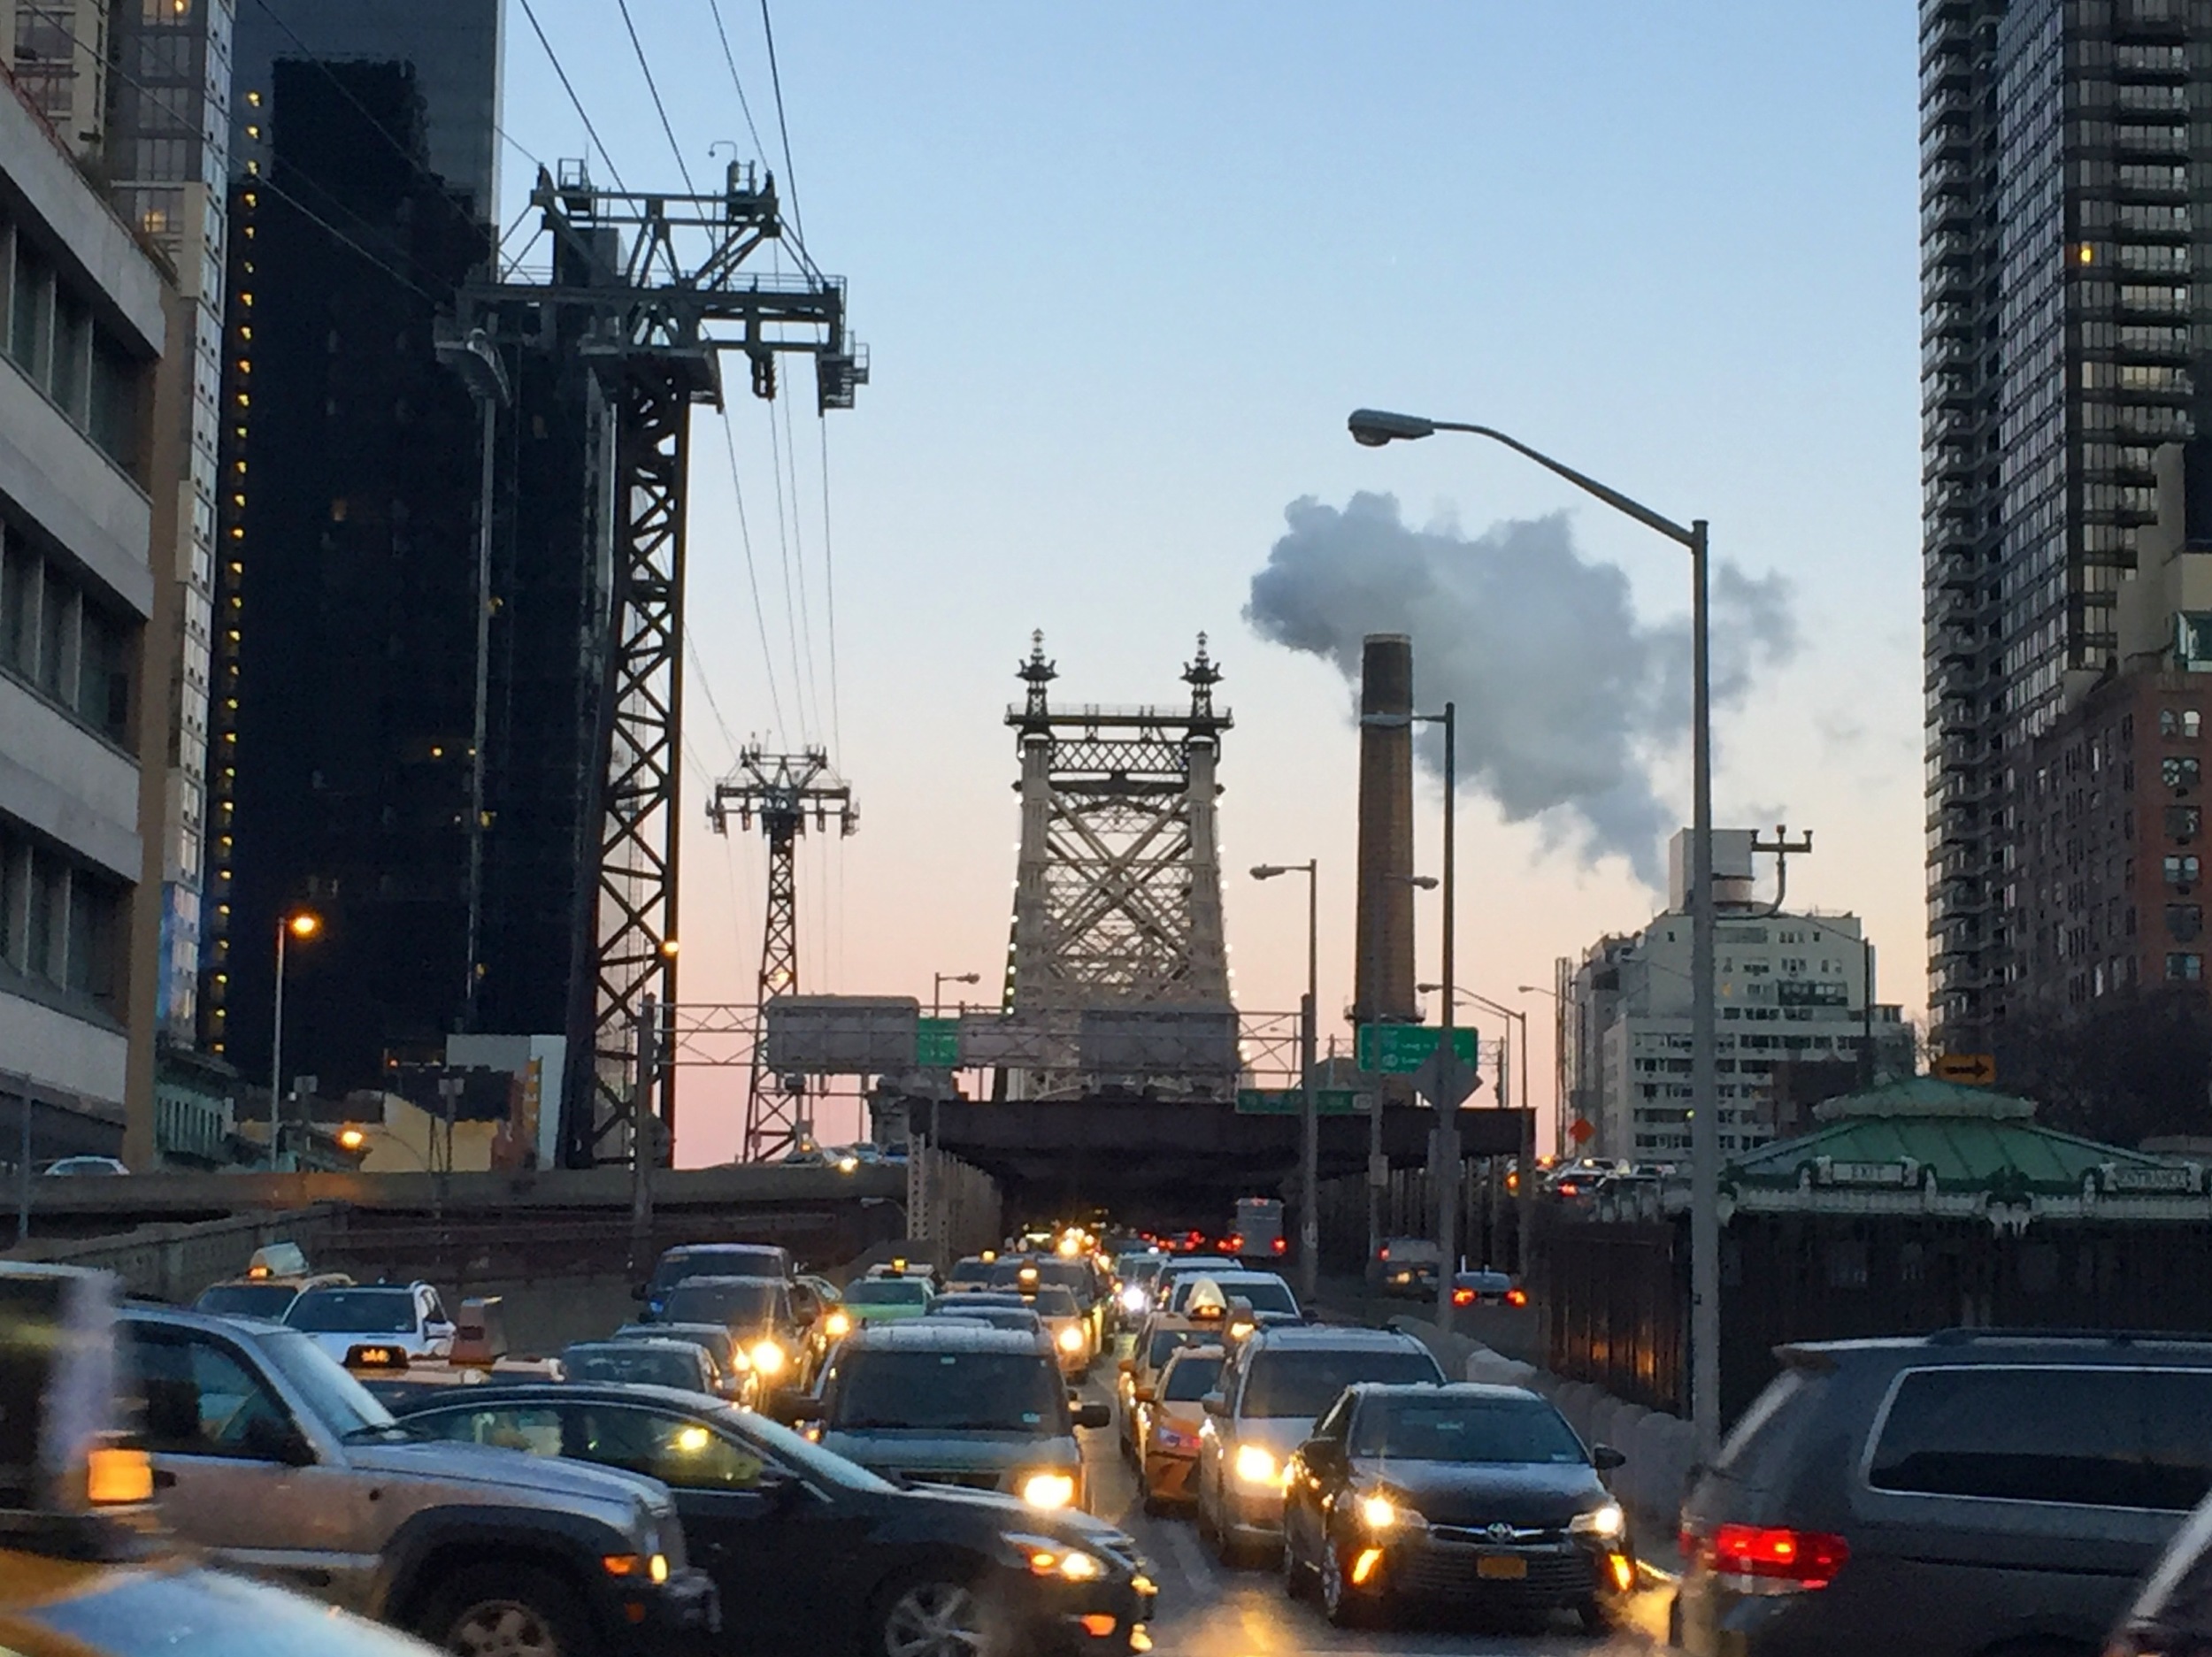 Industrialized traffic city: how I imagined all of New York to feel.